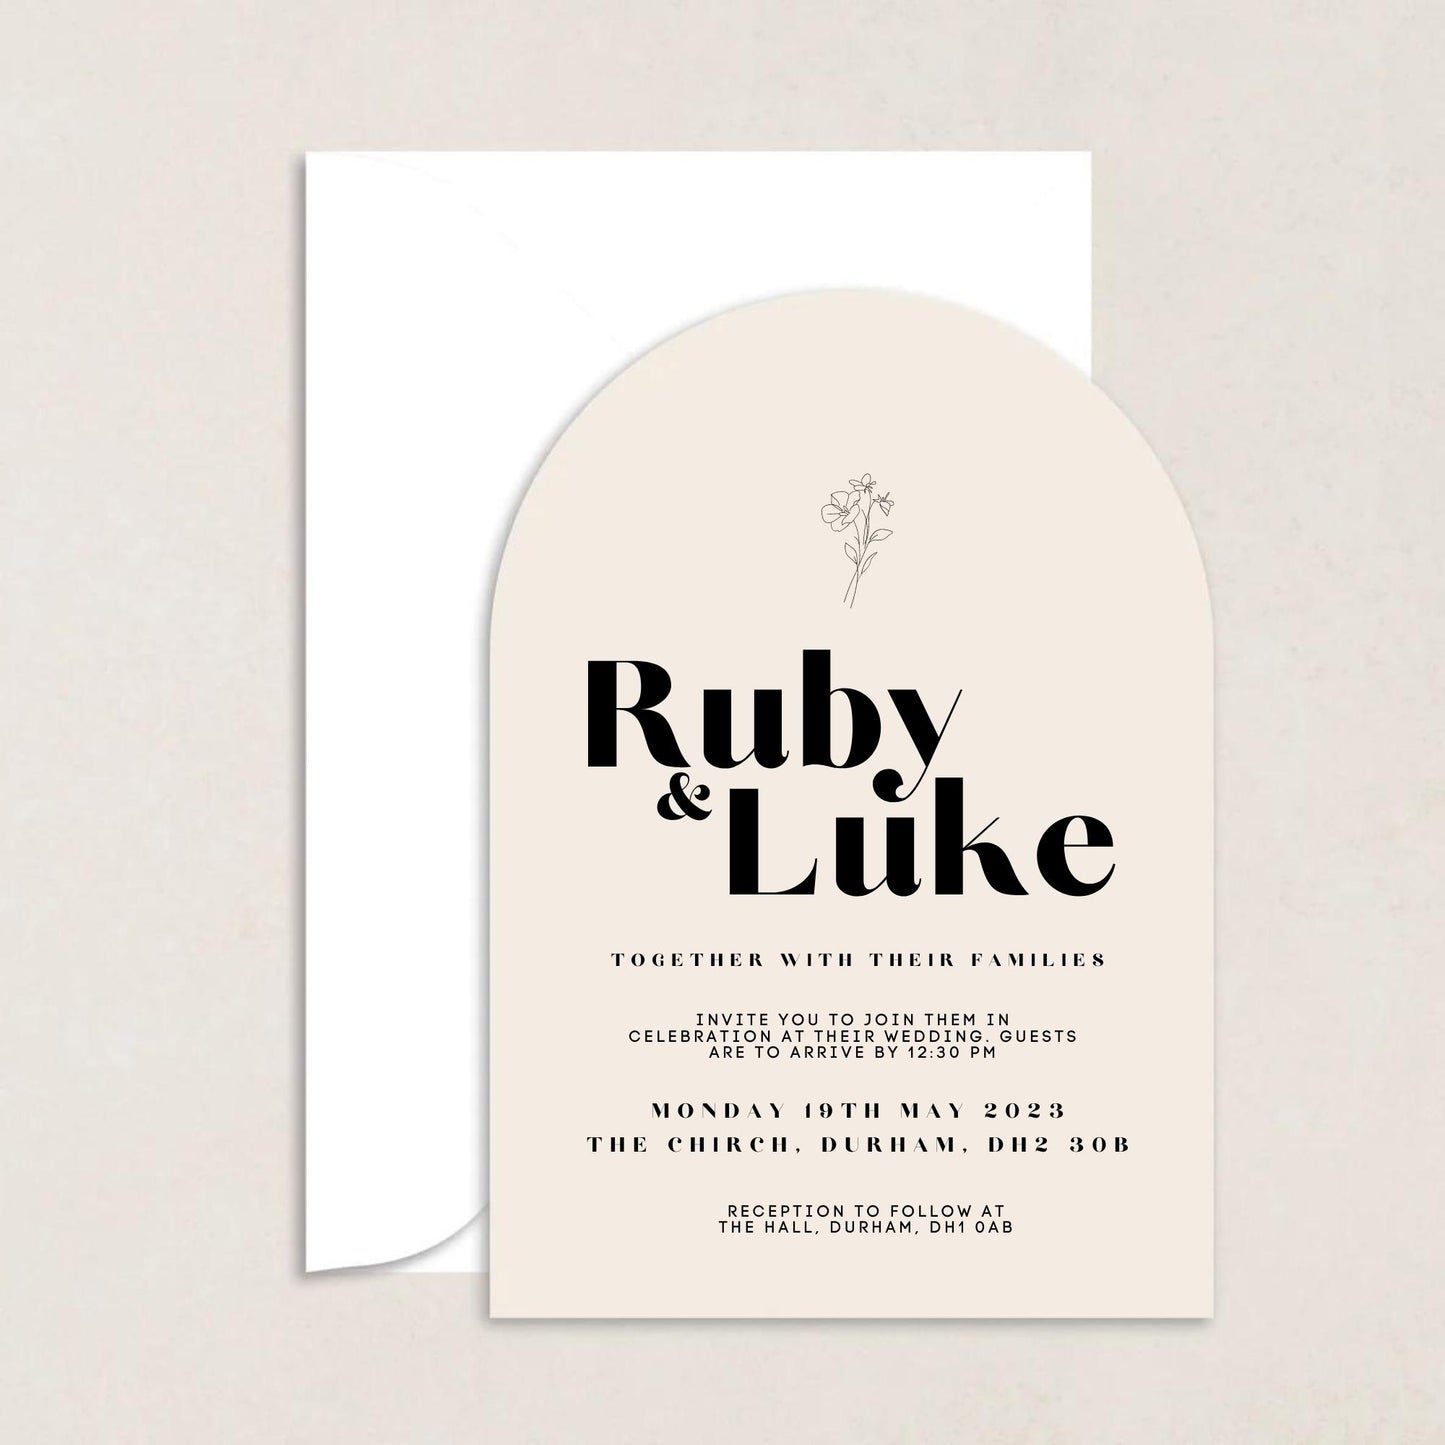 RUBY Wedding Invitations - Wedding Invitations available at The Ivy Collection | Luxury Wedding Stationery